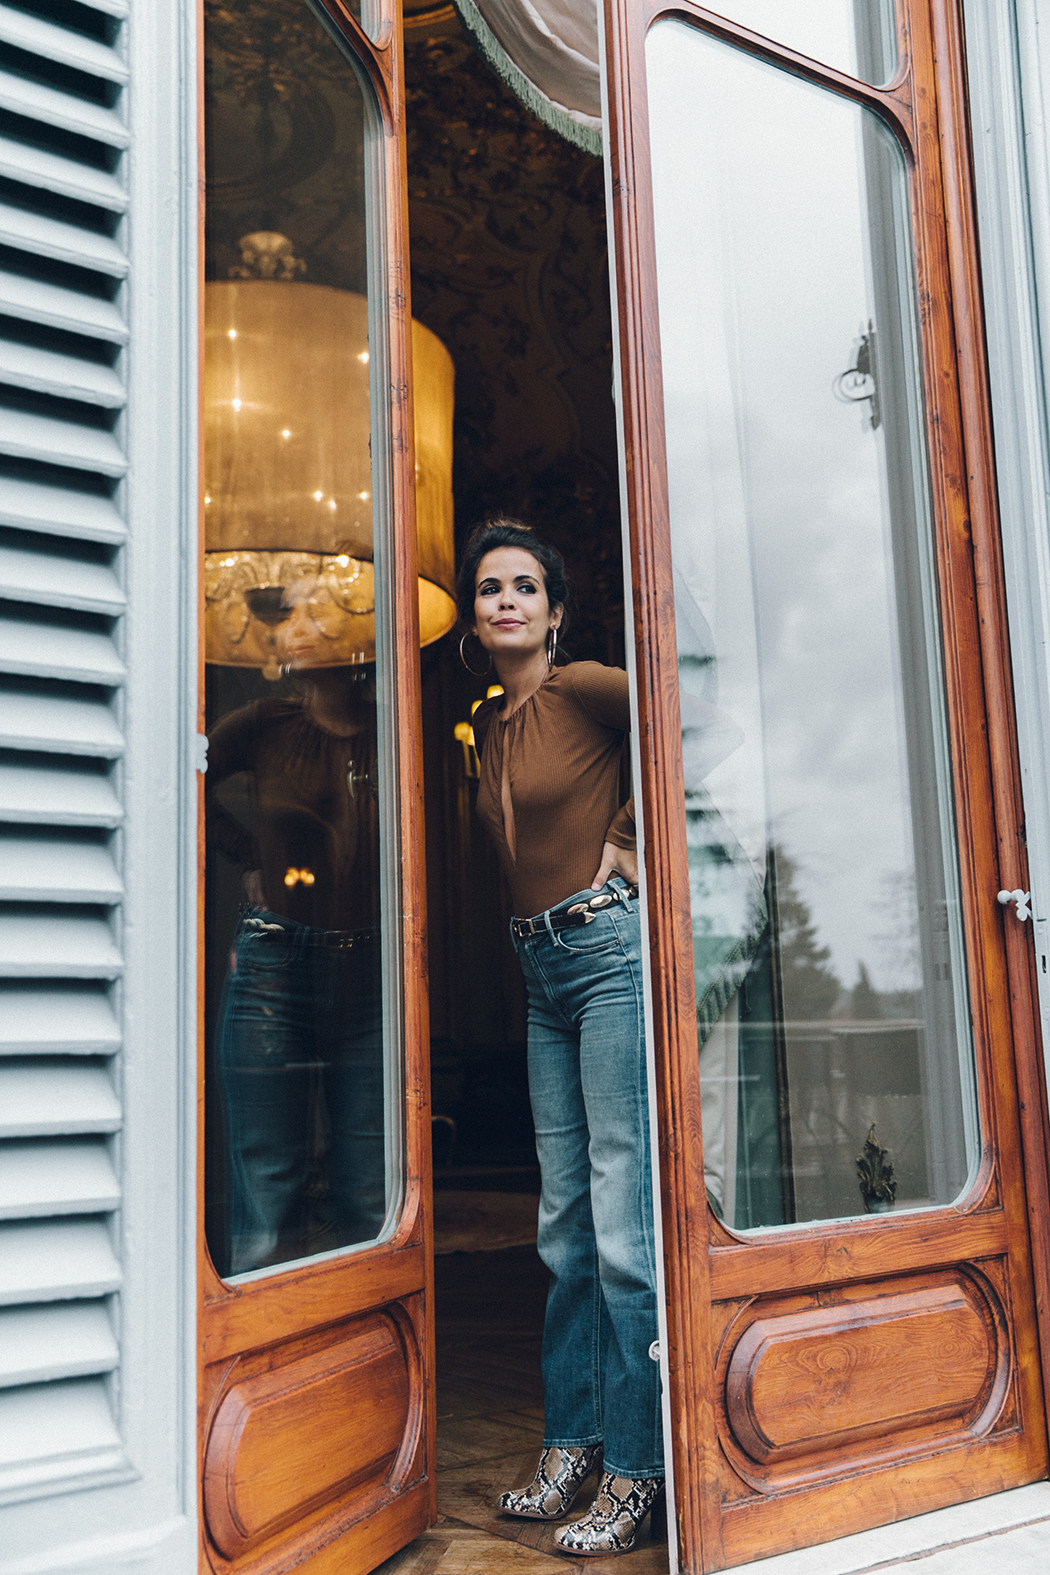 Luisa_Via_Roma-Firenze_For_Ever-Camel_Body-Reformation-Mother_Jeans-Snake_Boots-Hoop_Earrings-Outfit-Collage_Vintage-Florence-Villa_Cora_Hotel-86